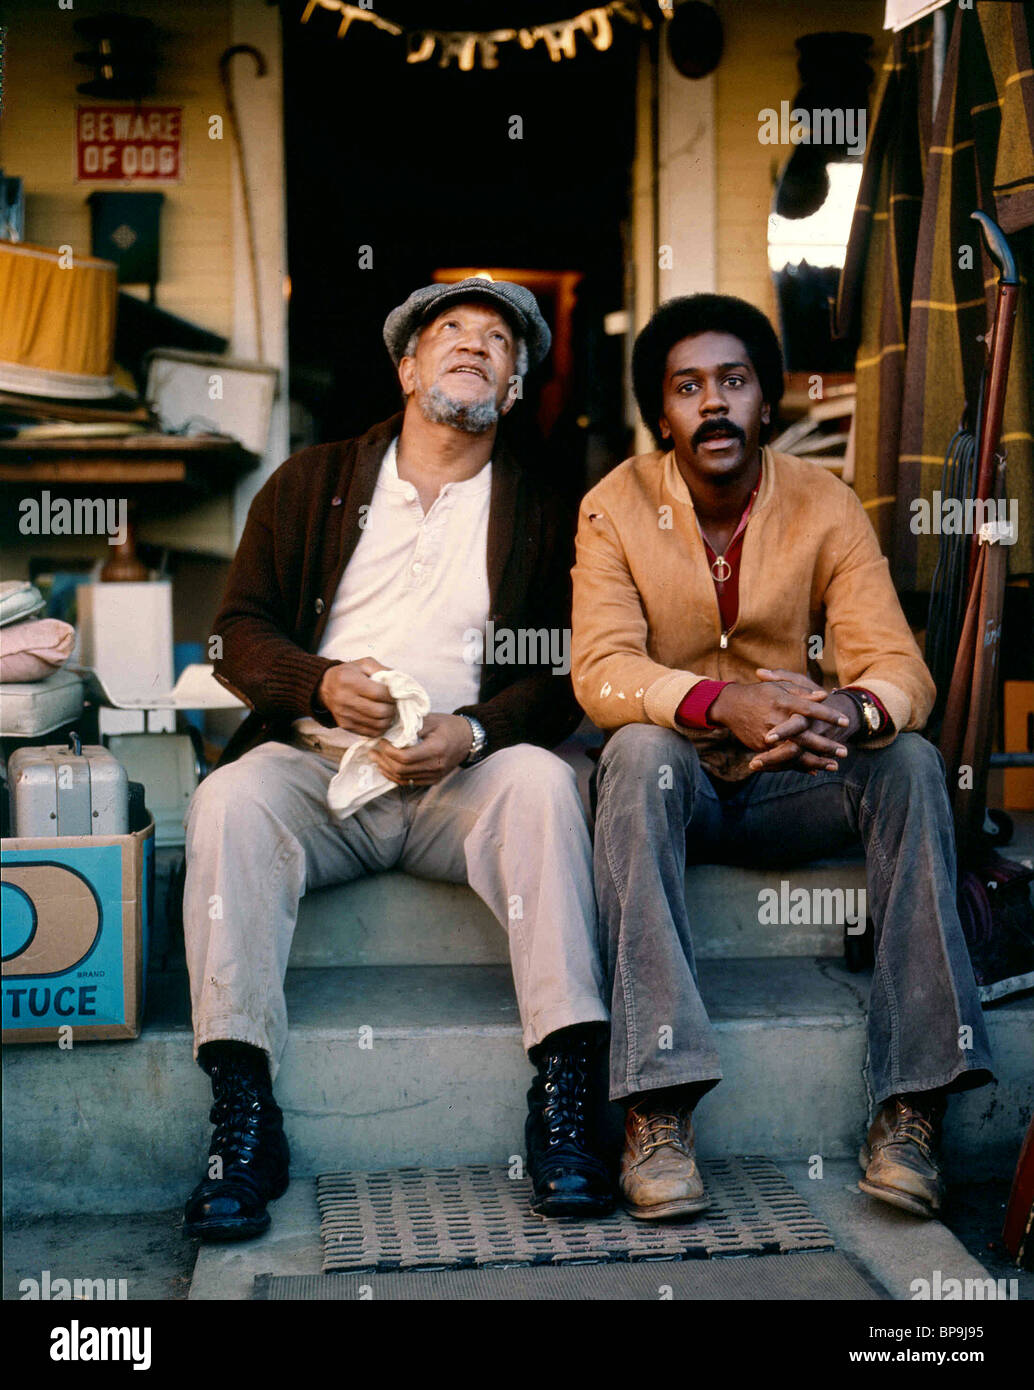 Sanford And Son Stock Photos & Sanford And Son Stock Images - Alamy